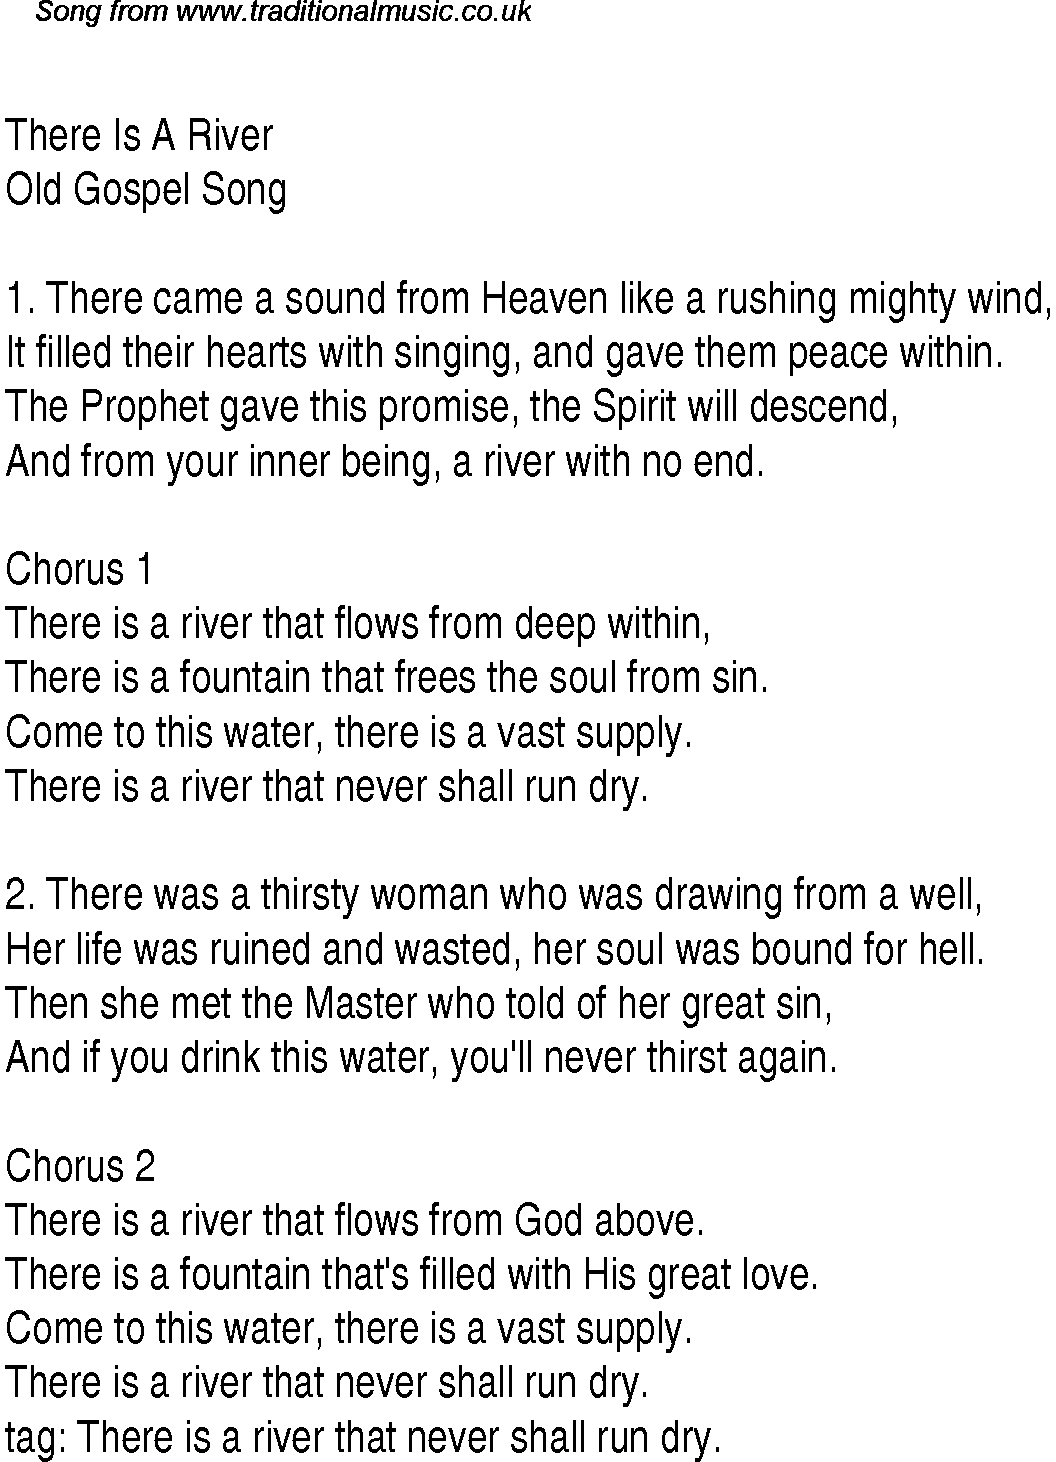 Gospel Song: there-is-a-river, lyrics and chords.